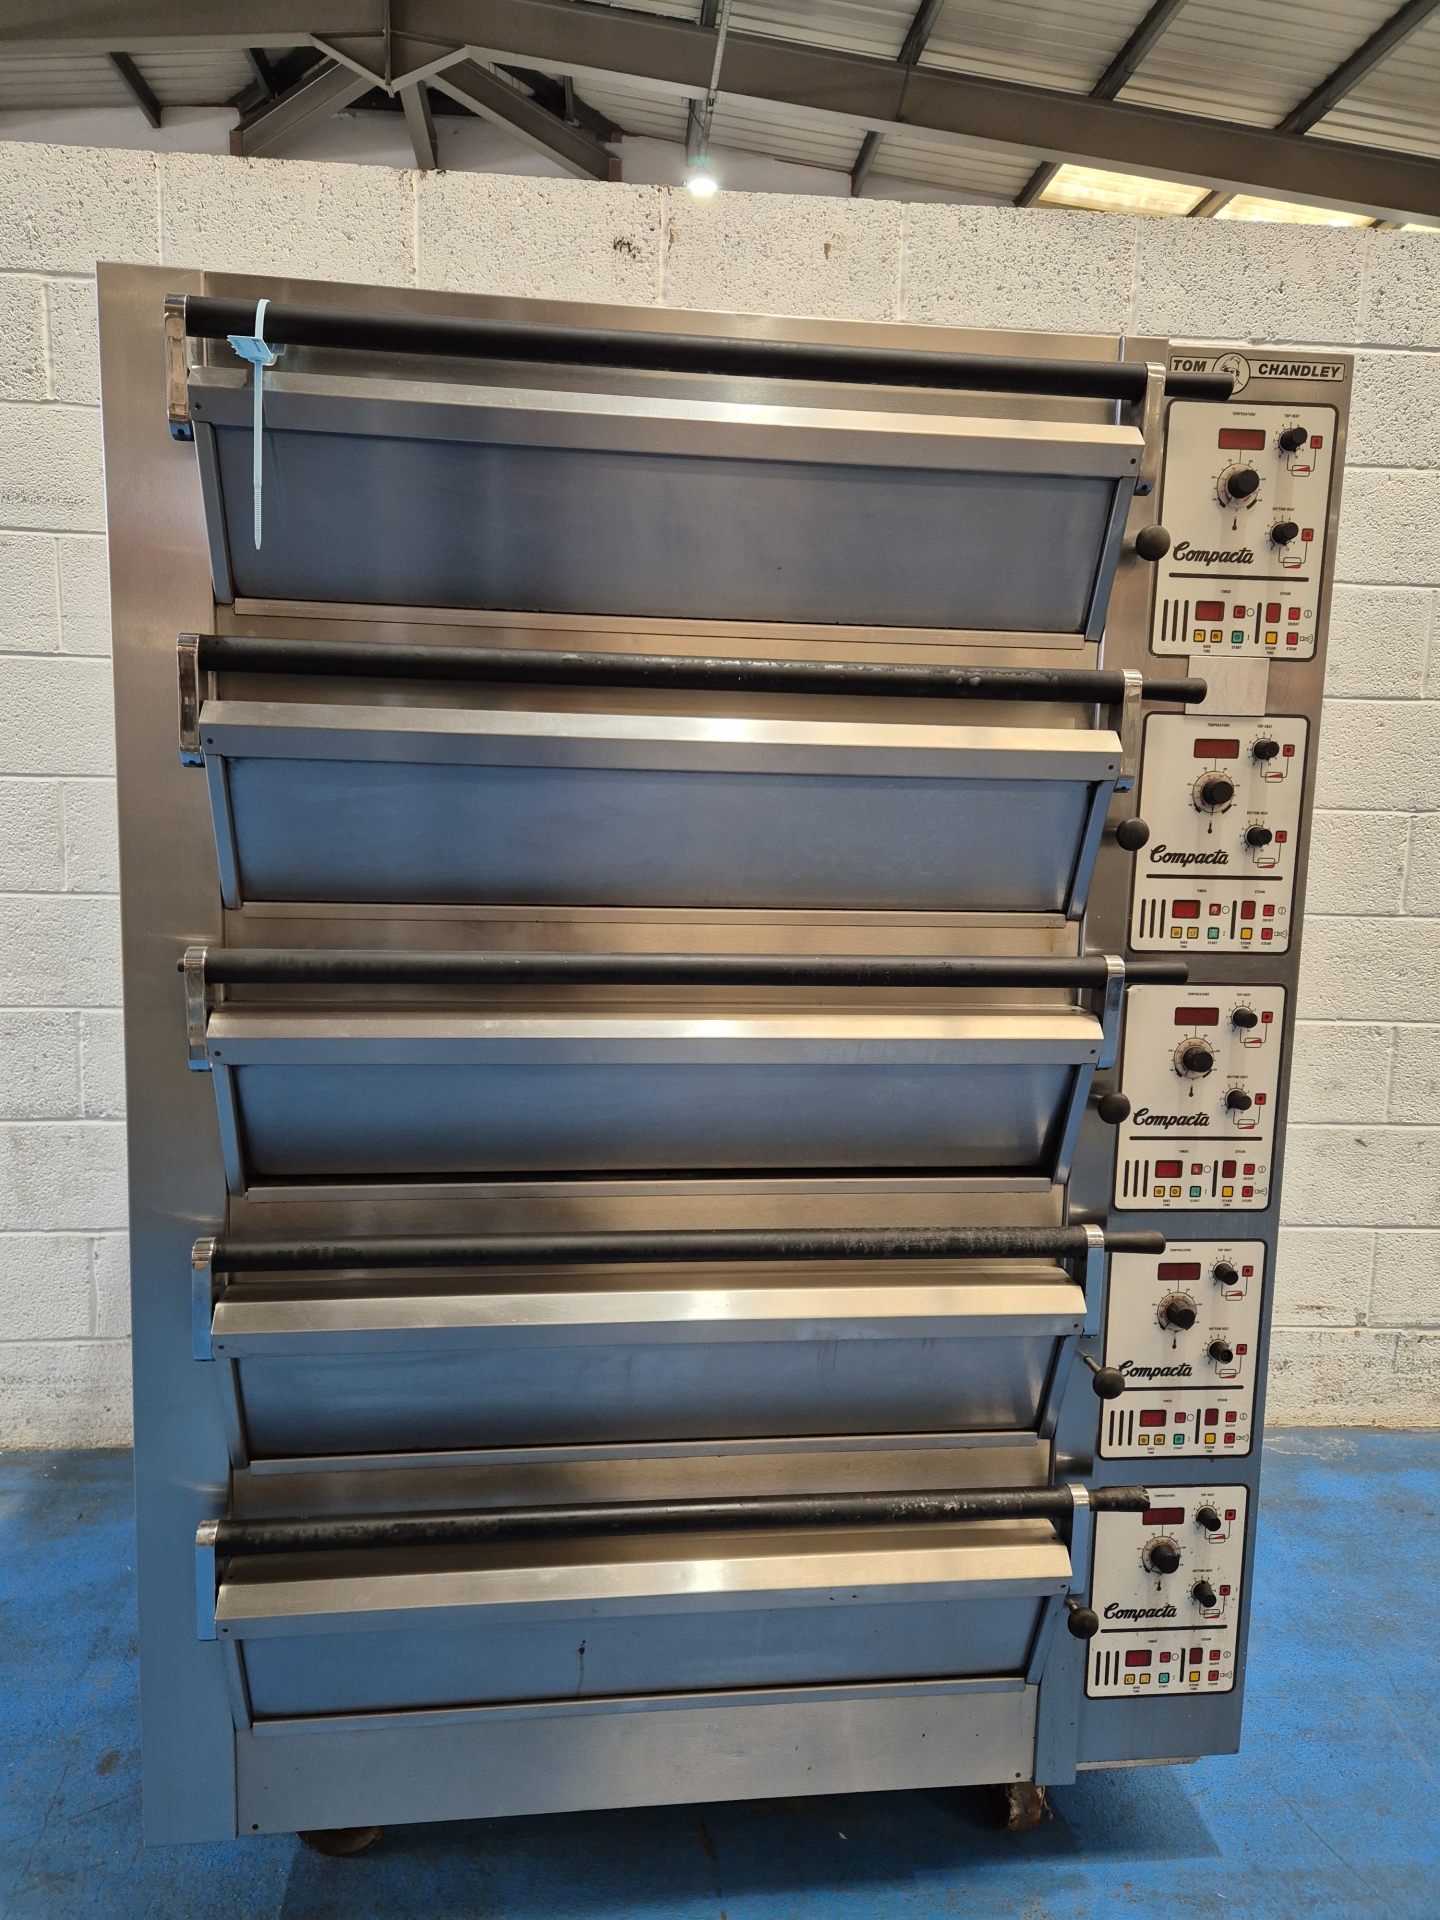 Tom Chandley 10 Tray (18" x 30" Trays) Deck Oven